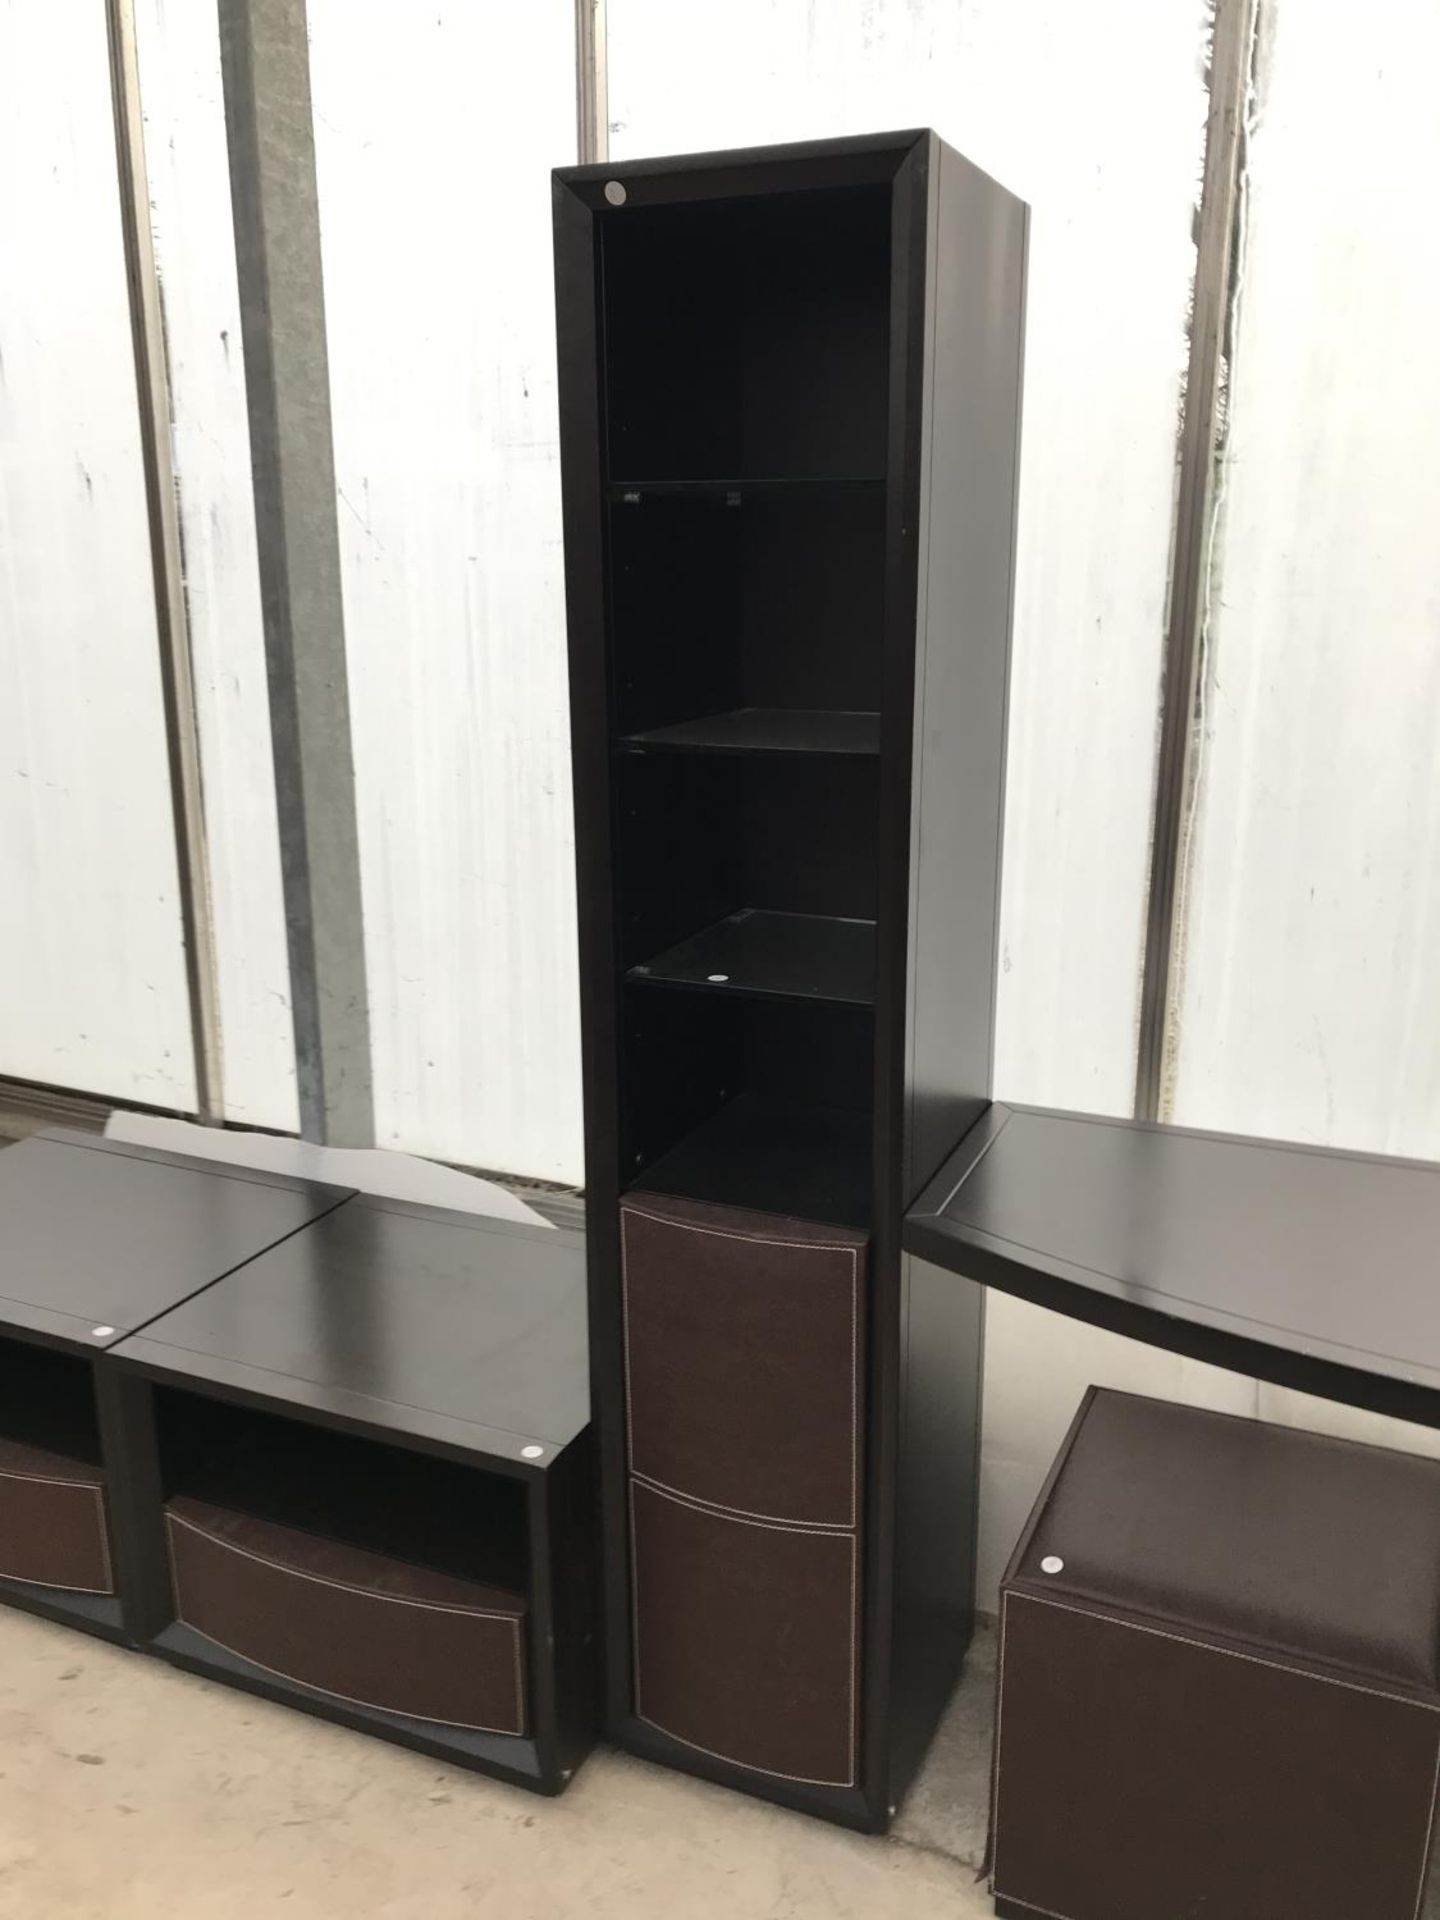 FIVE ITEMS OF MODERN BLACK FURNITURE - TWO CABINETS WITH SINGLE LEATHERETTE DRAWERS, A TALL - Image 3 of 4